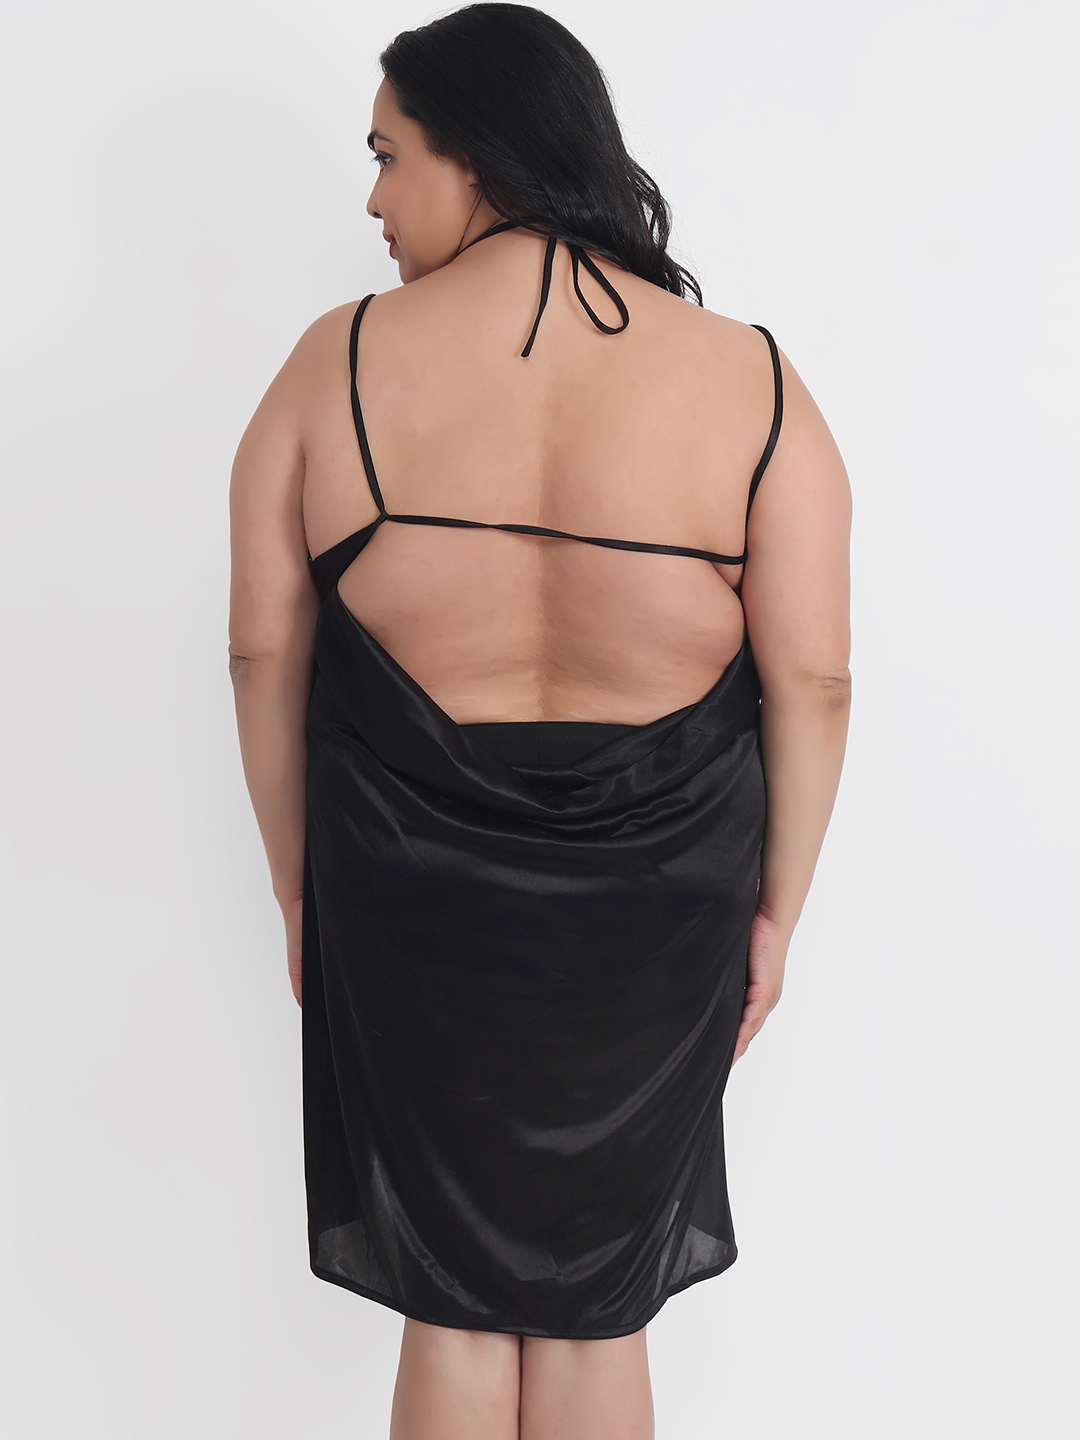 8 Beautiful Plus Size Dresses For All Occasions And Body Types | LBB